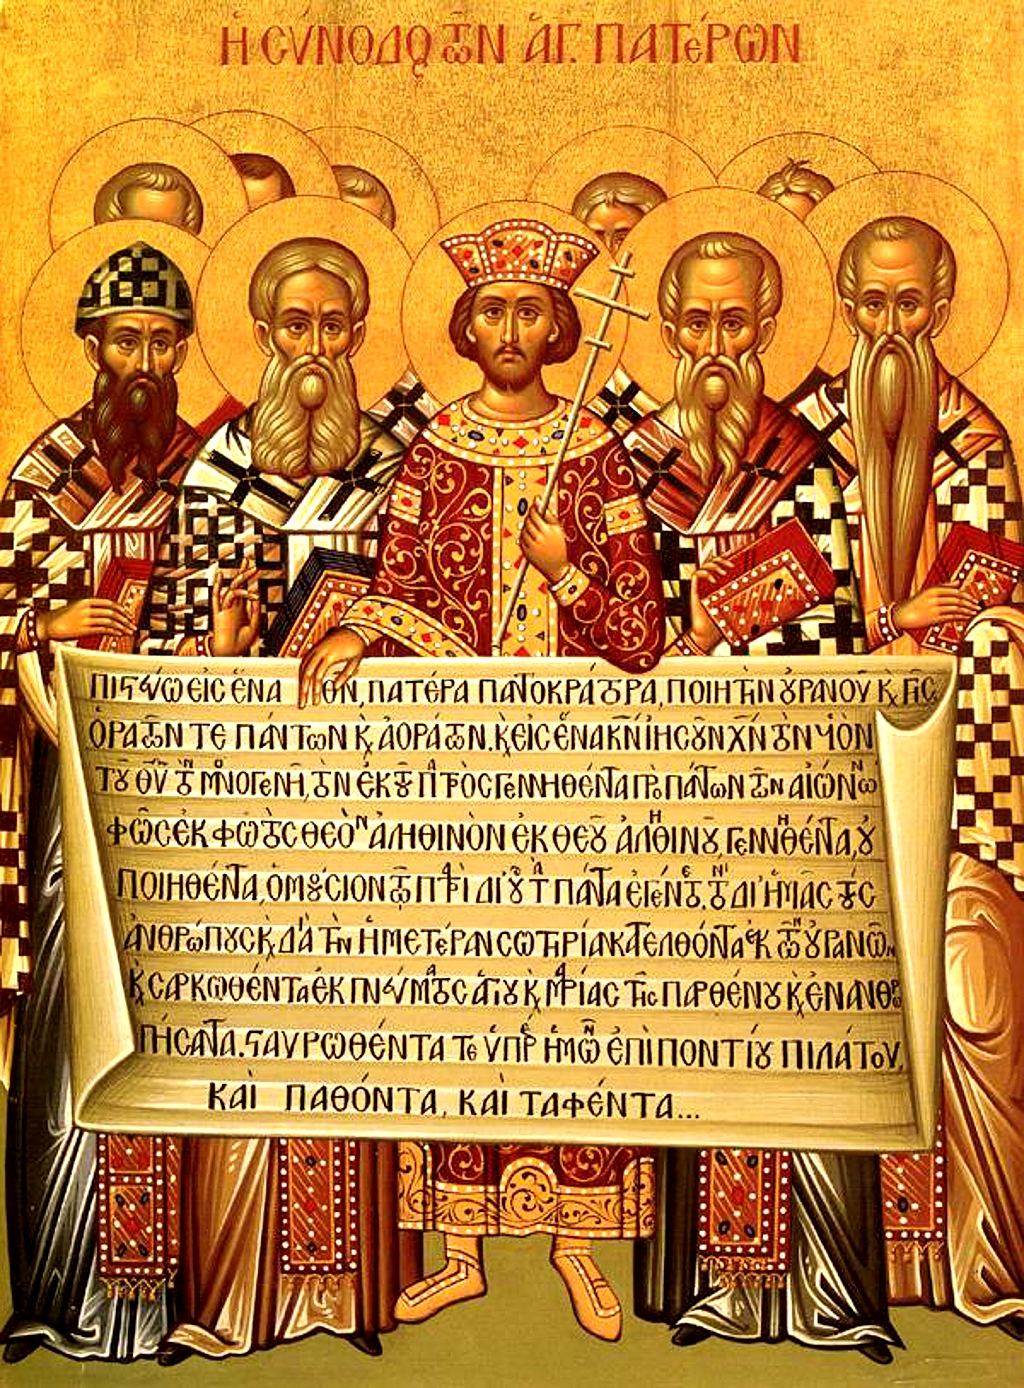 Icon of the Council of Nicaea